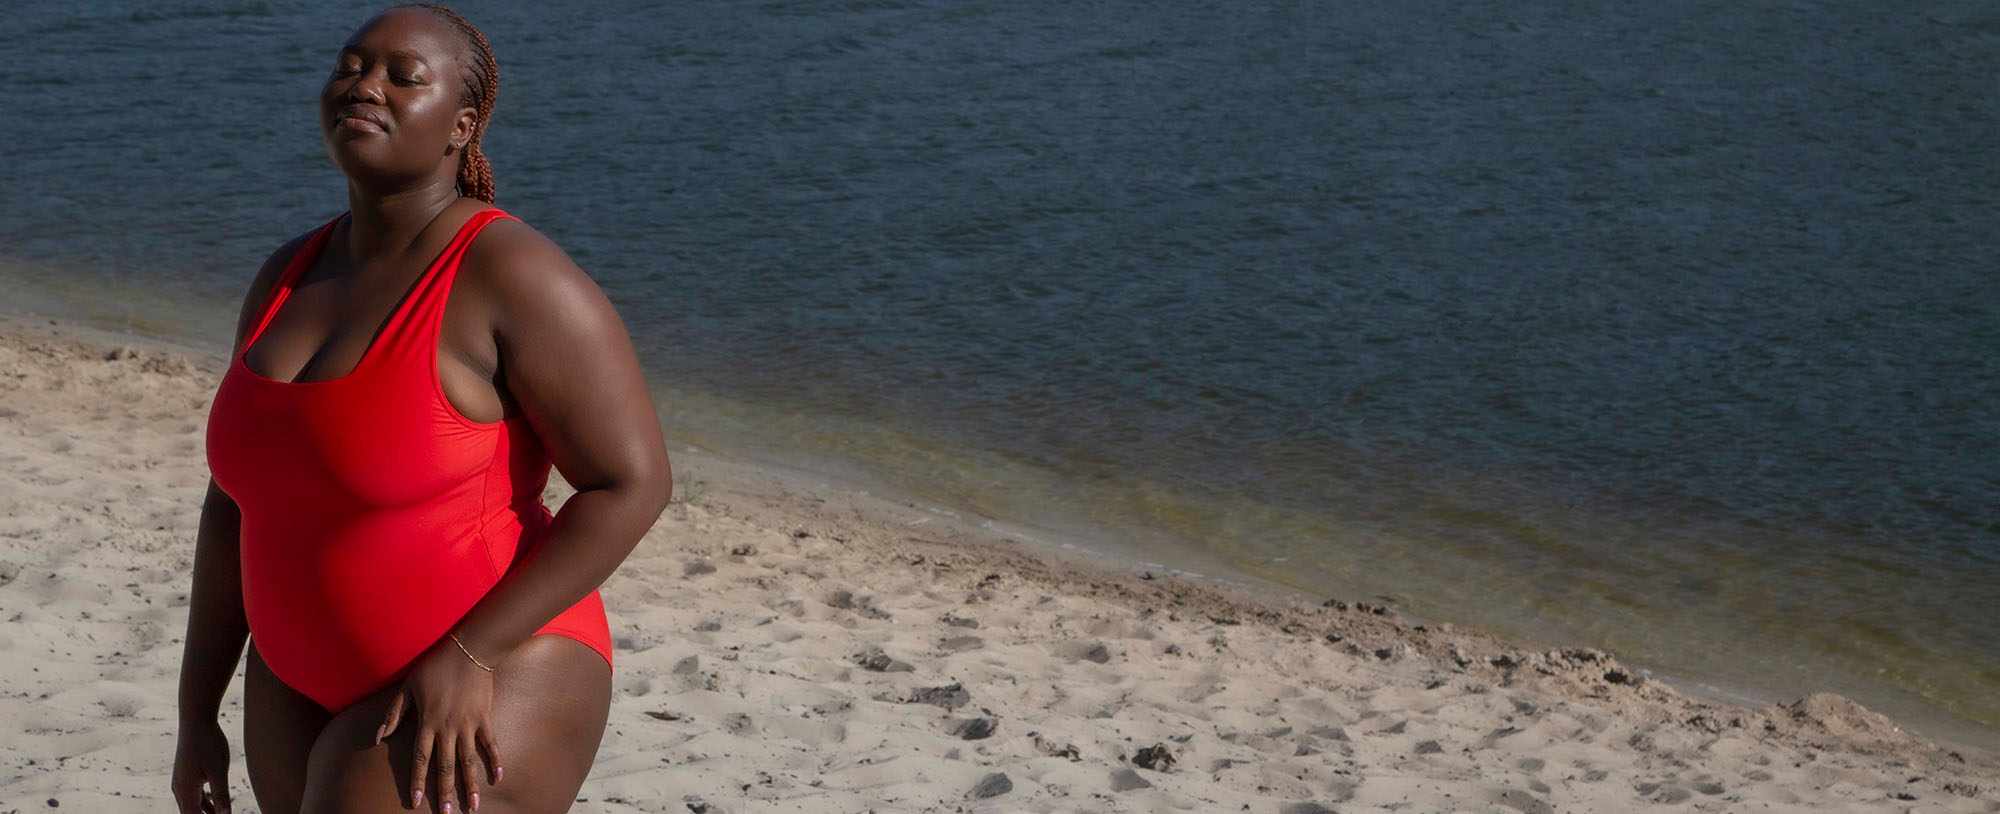 plus size model wearing a red one piece swimsuit on the beach